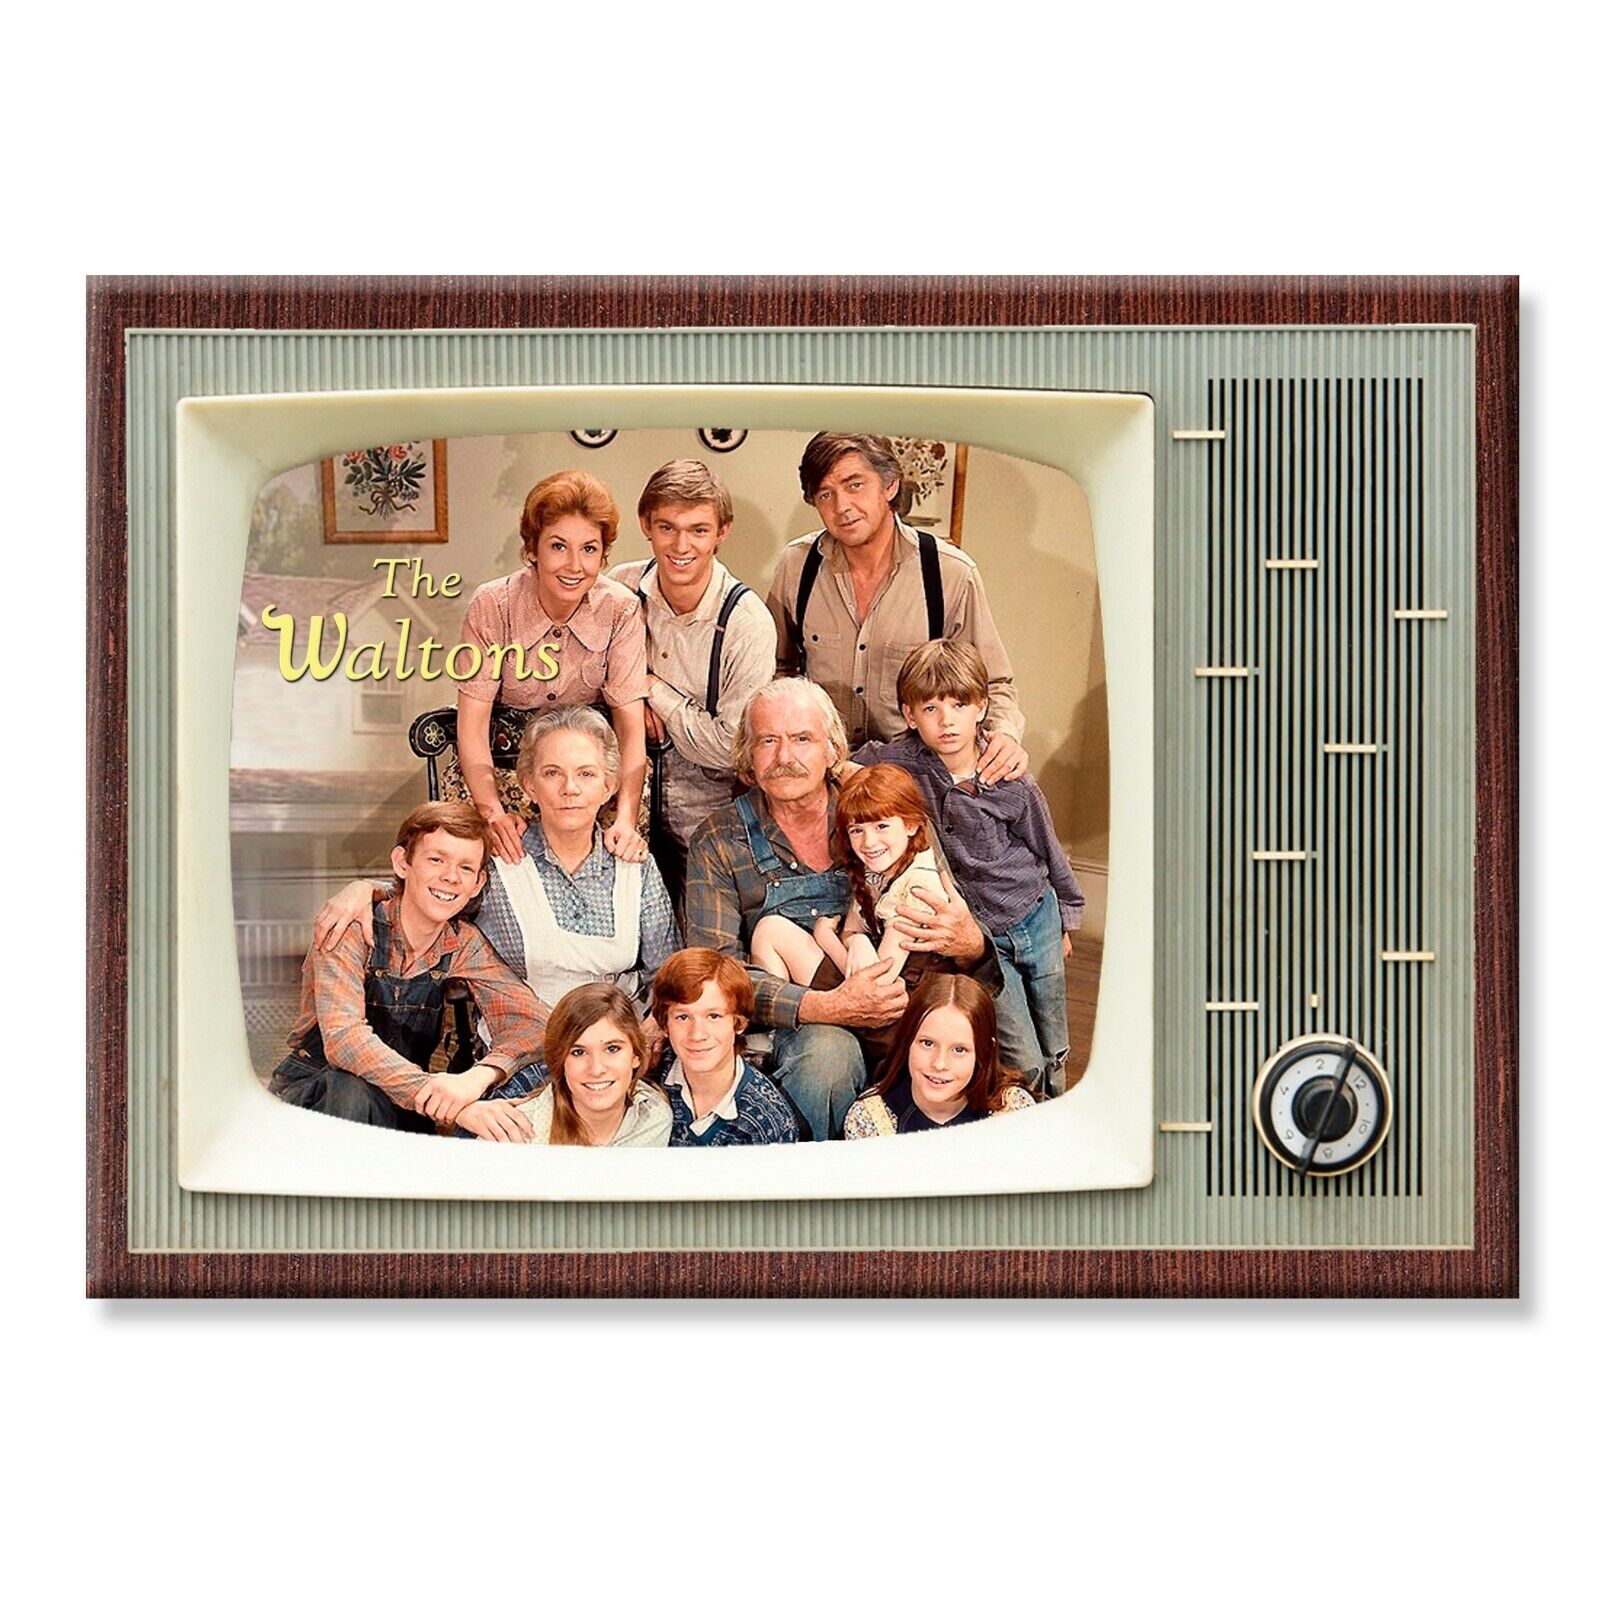 THE WALTONS Classic TV 3.5 inches x 2.5 inches Steel Cased FRIDGE MAGNET